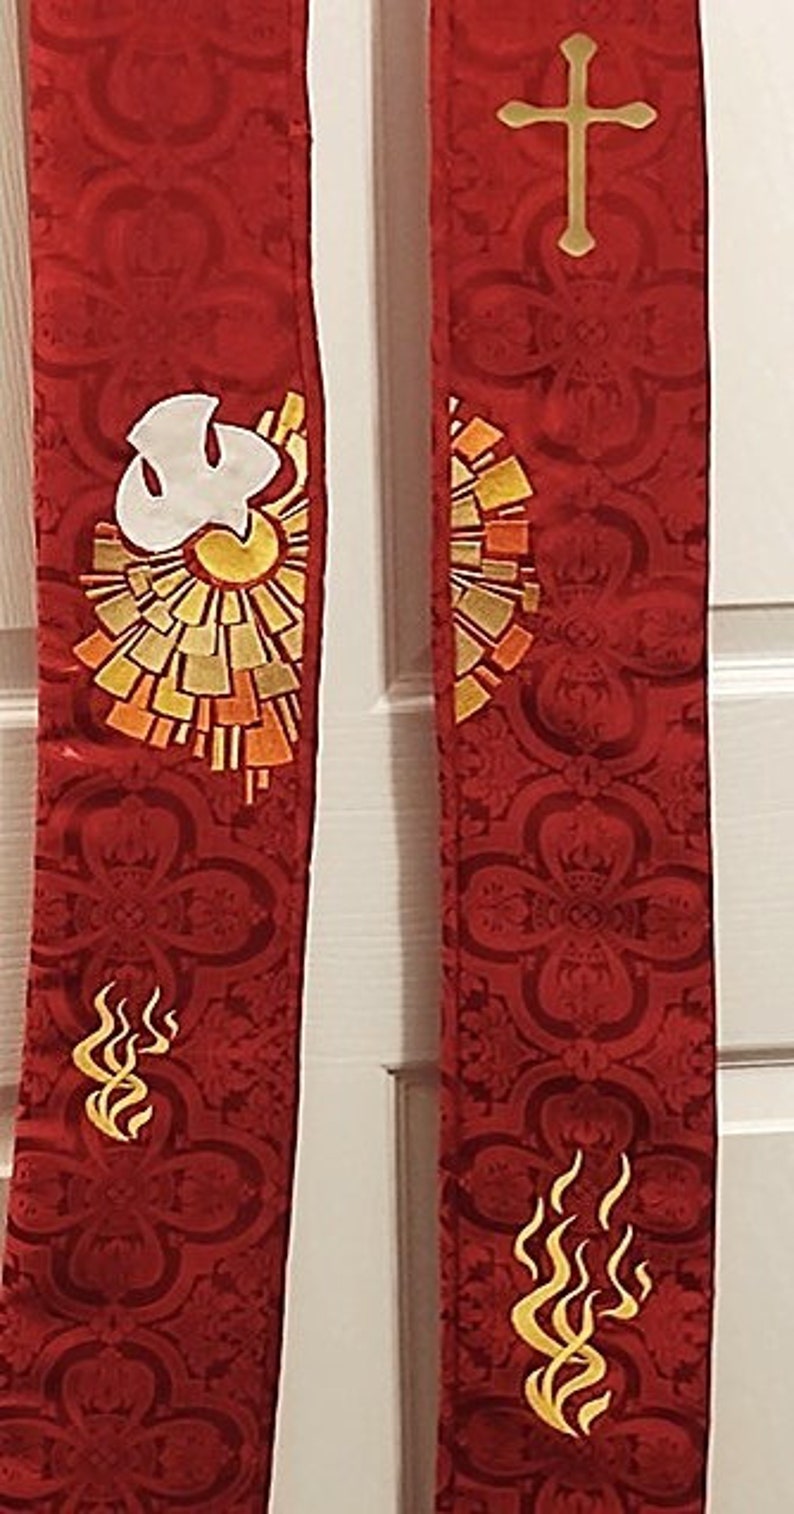 PENTECOST STOLE in BATIK 310 by Rosemary St. Clair - Etsy